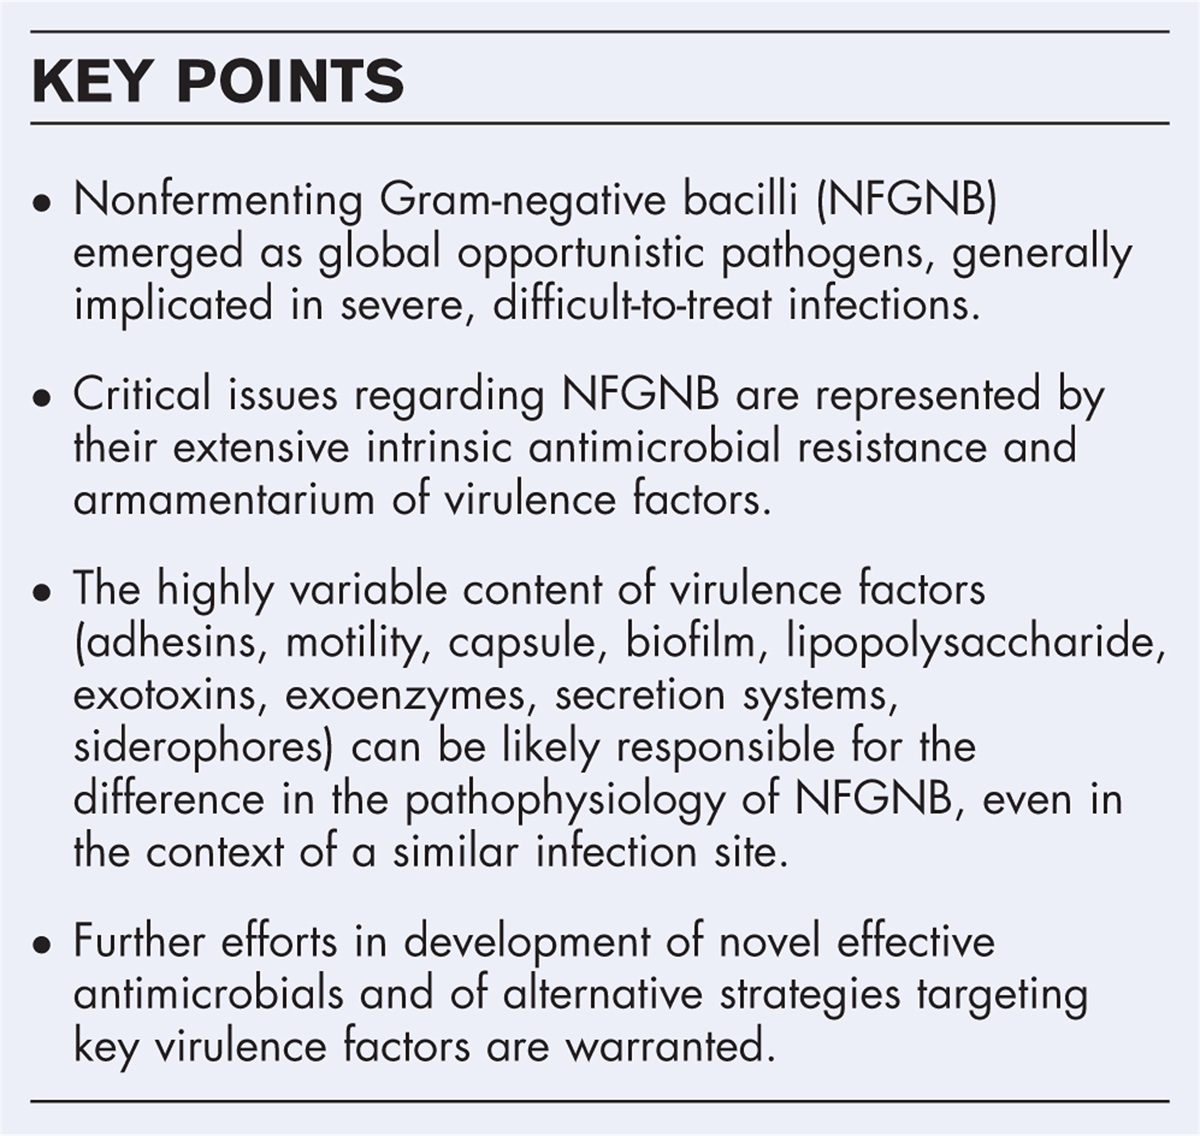 The microbiology and pathogenesis of nonfermenting Gram-negative infections